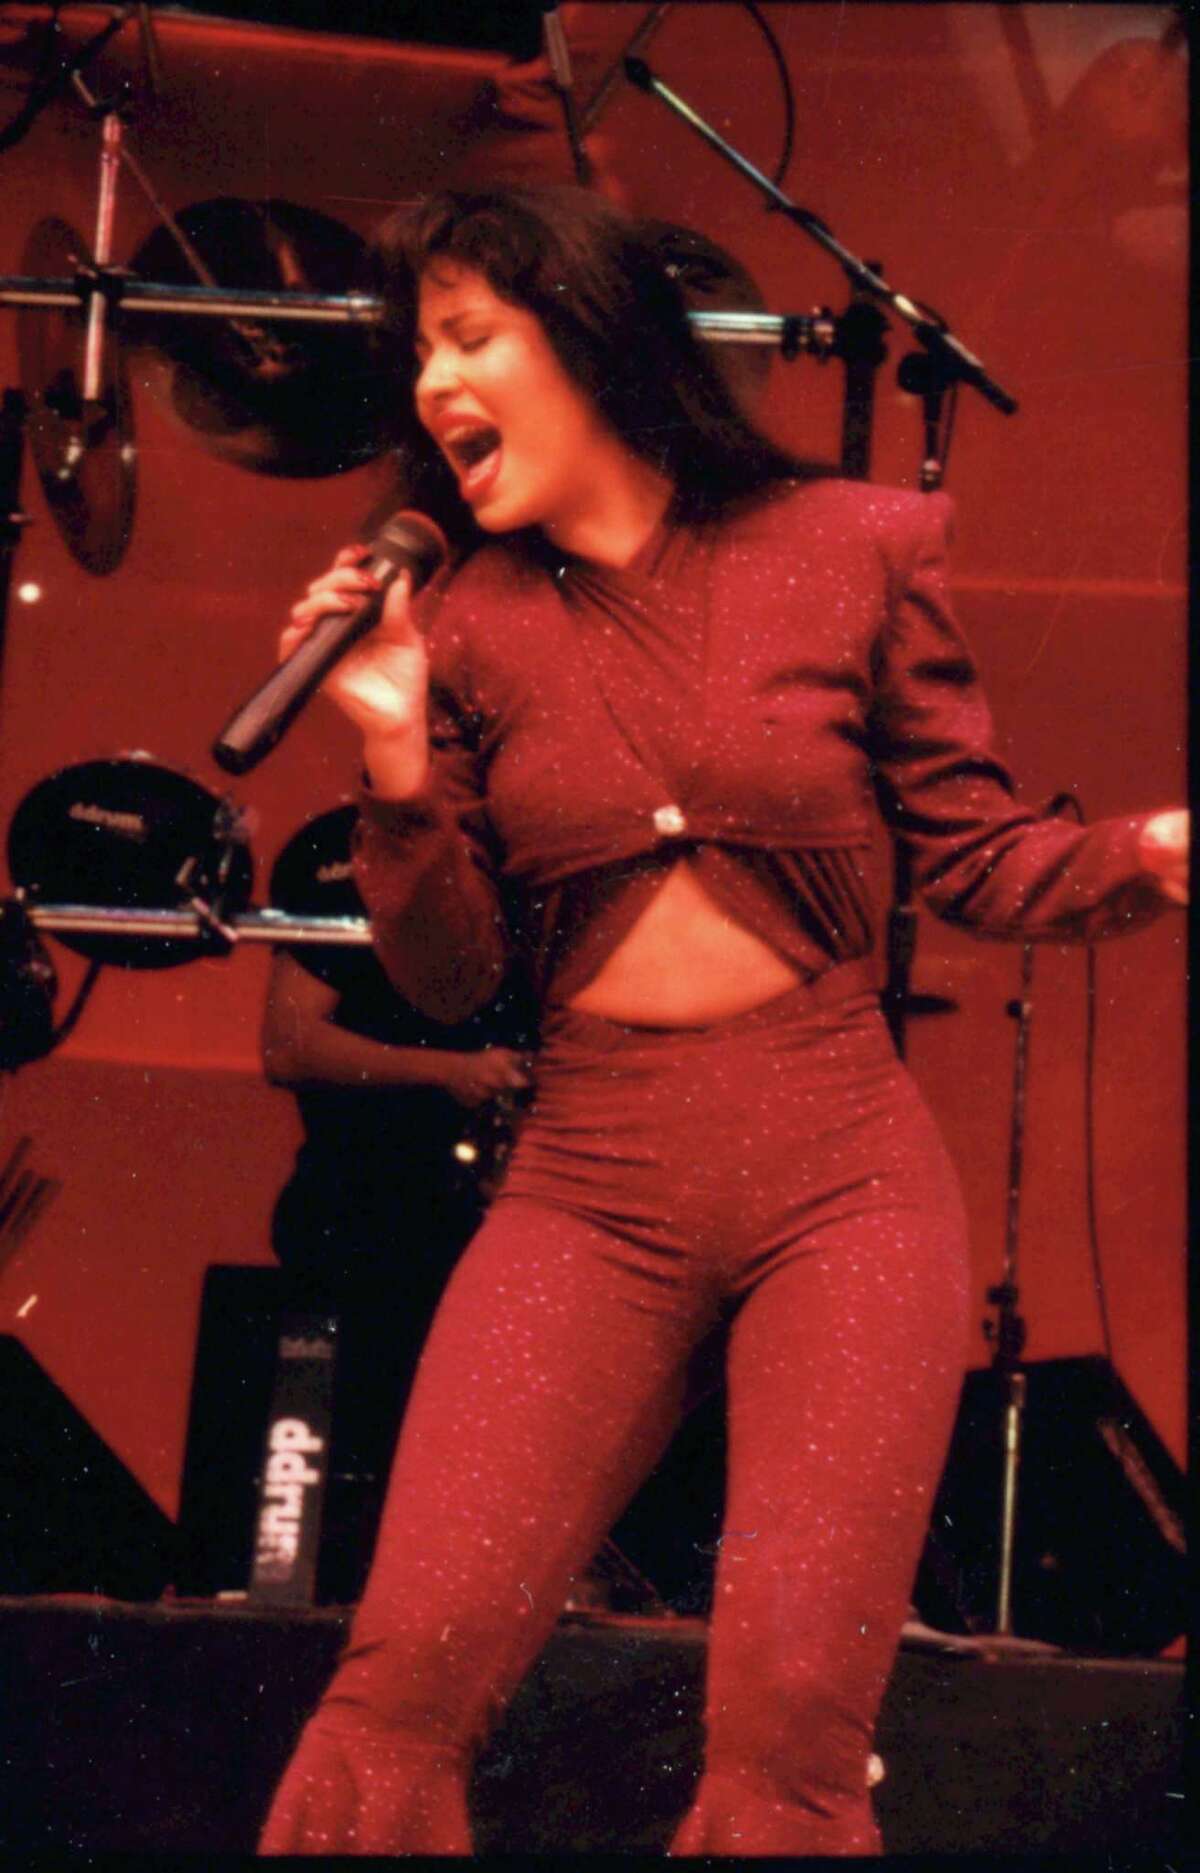 02/26/1995 - Tejano singer Selena performs at the Astrodome during the Houston Livestock Show and Rodeo. Selena Quintanilla Perez.